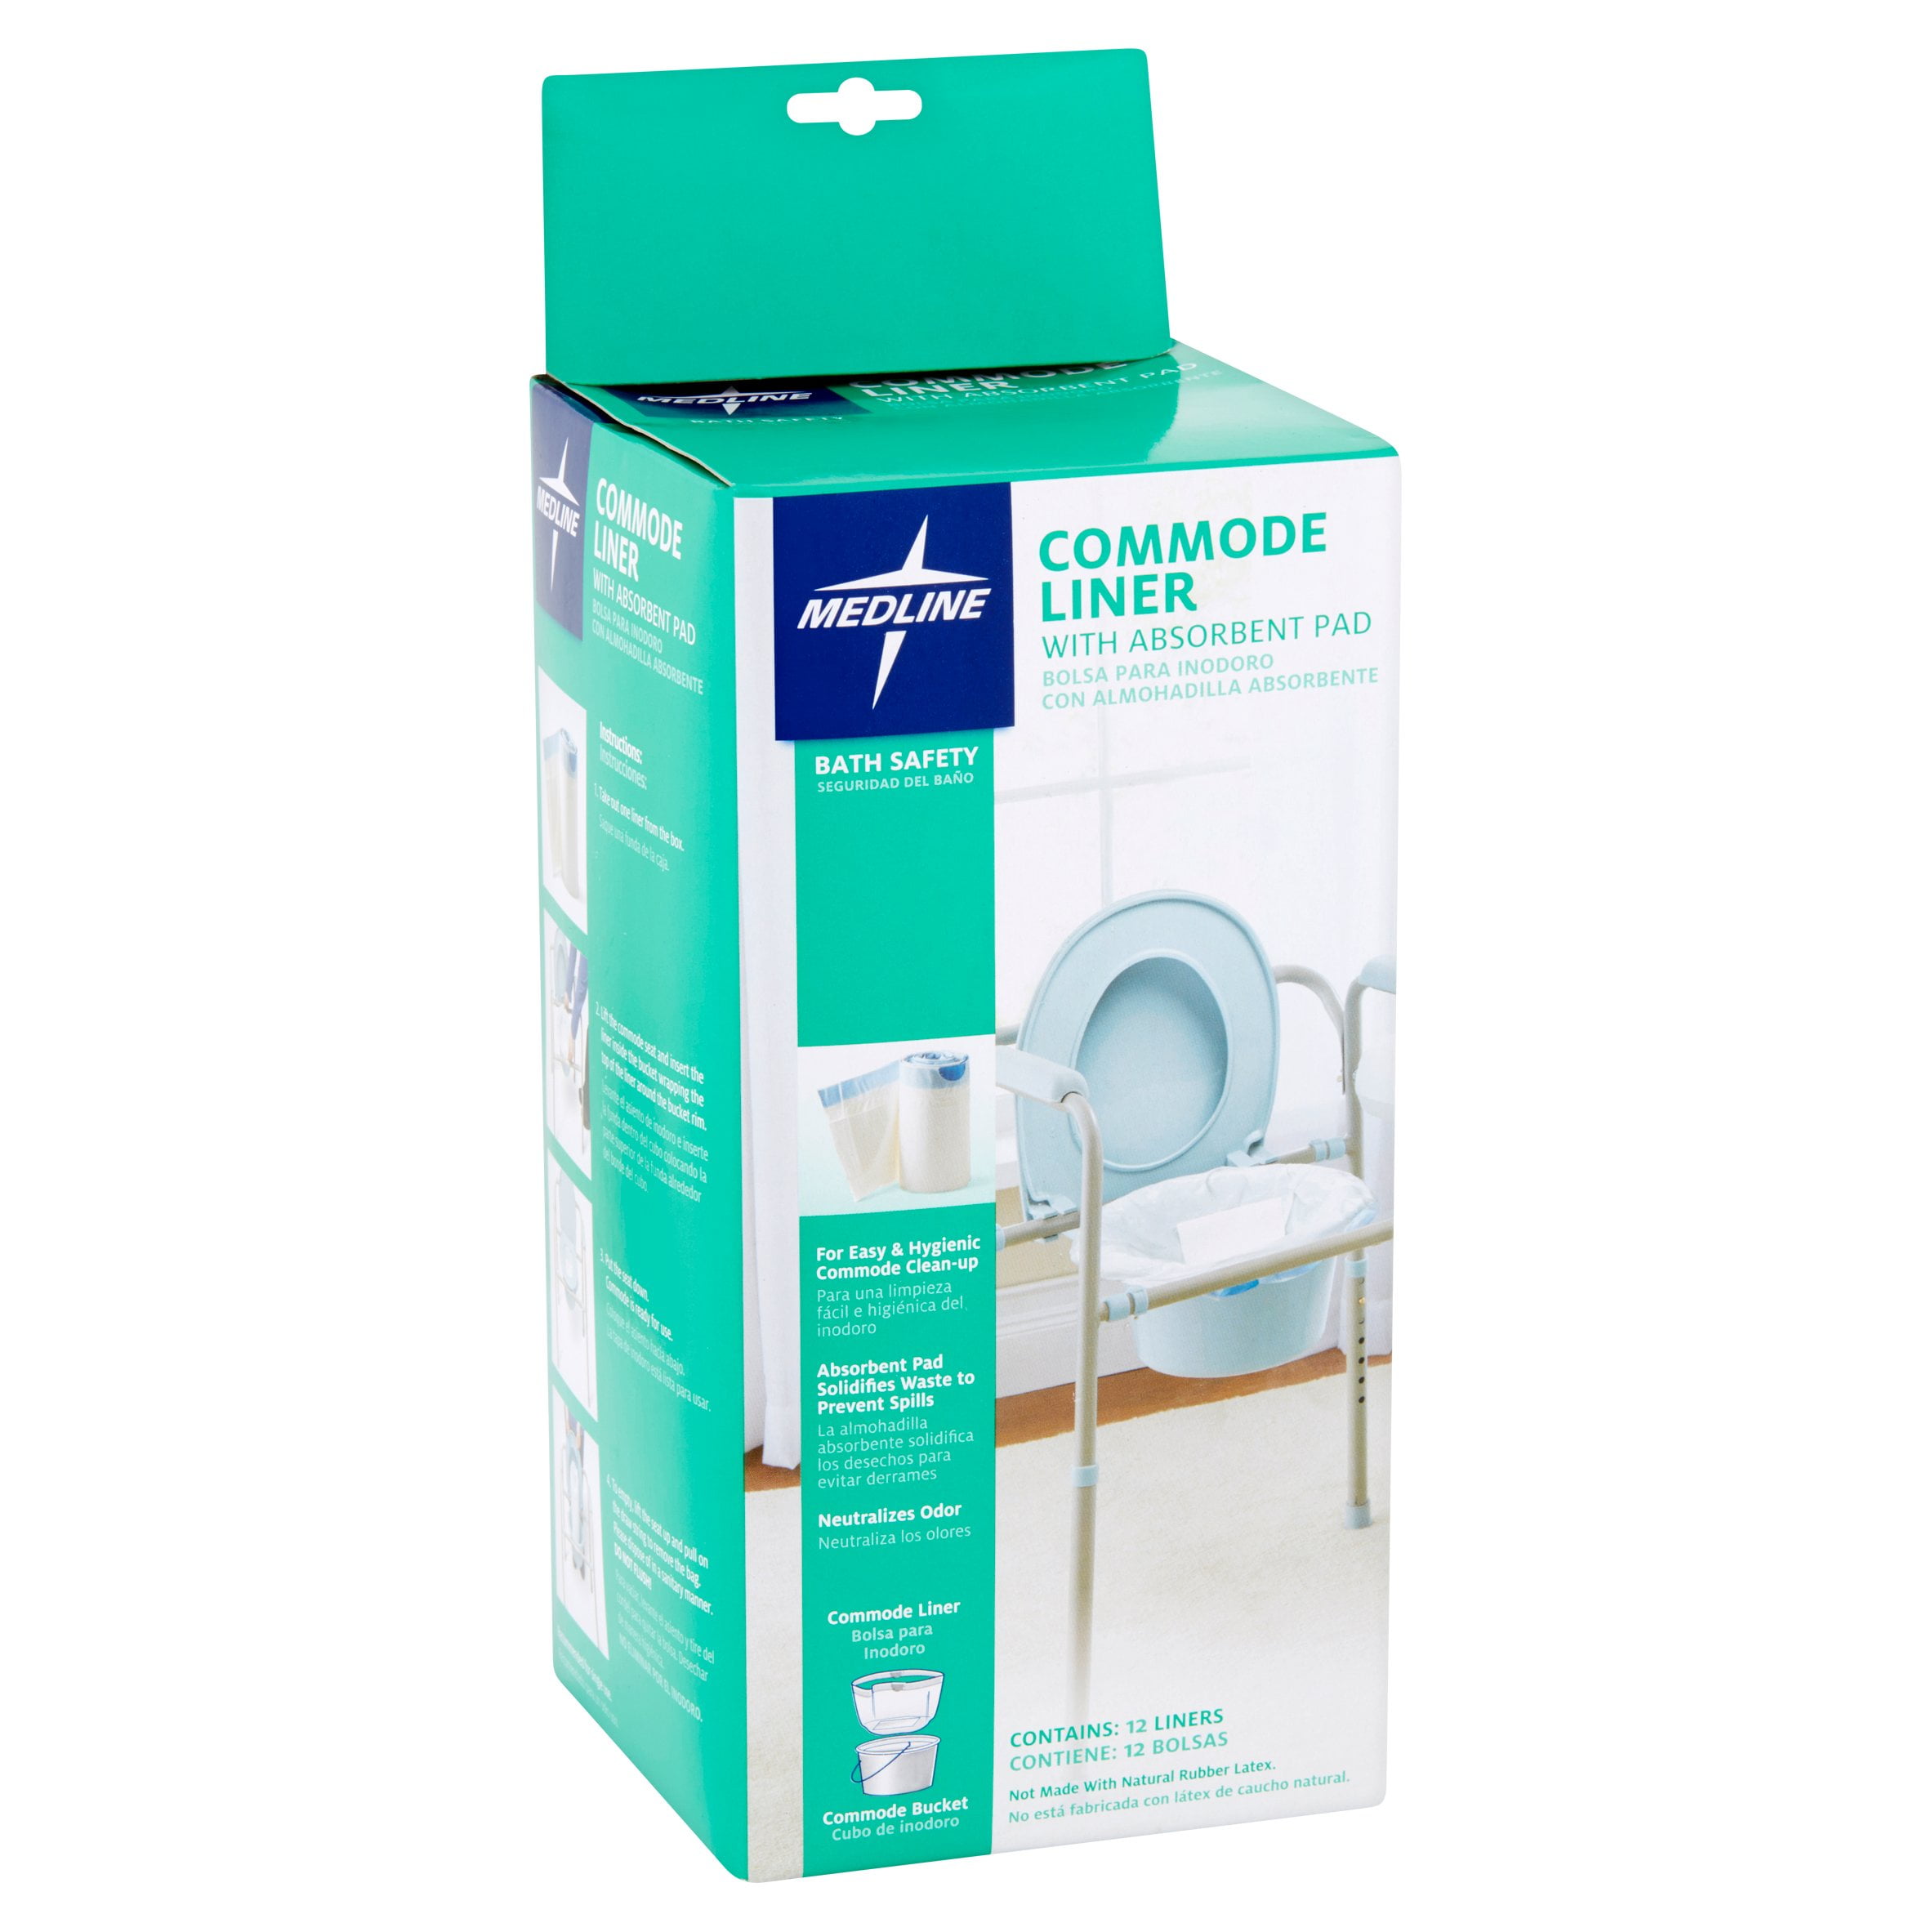 Medline Commode Liner with Absorbent Pad, Fits Standard Commodes, 12 Count